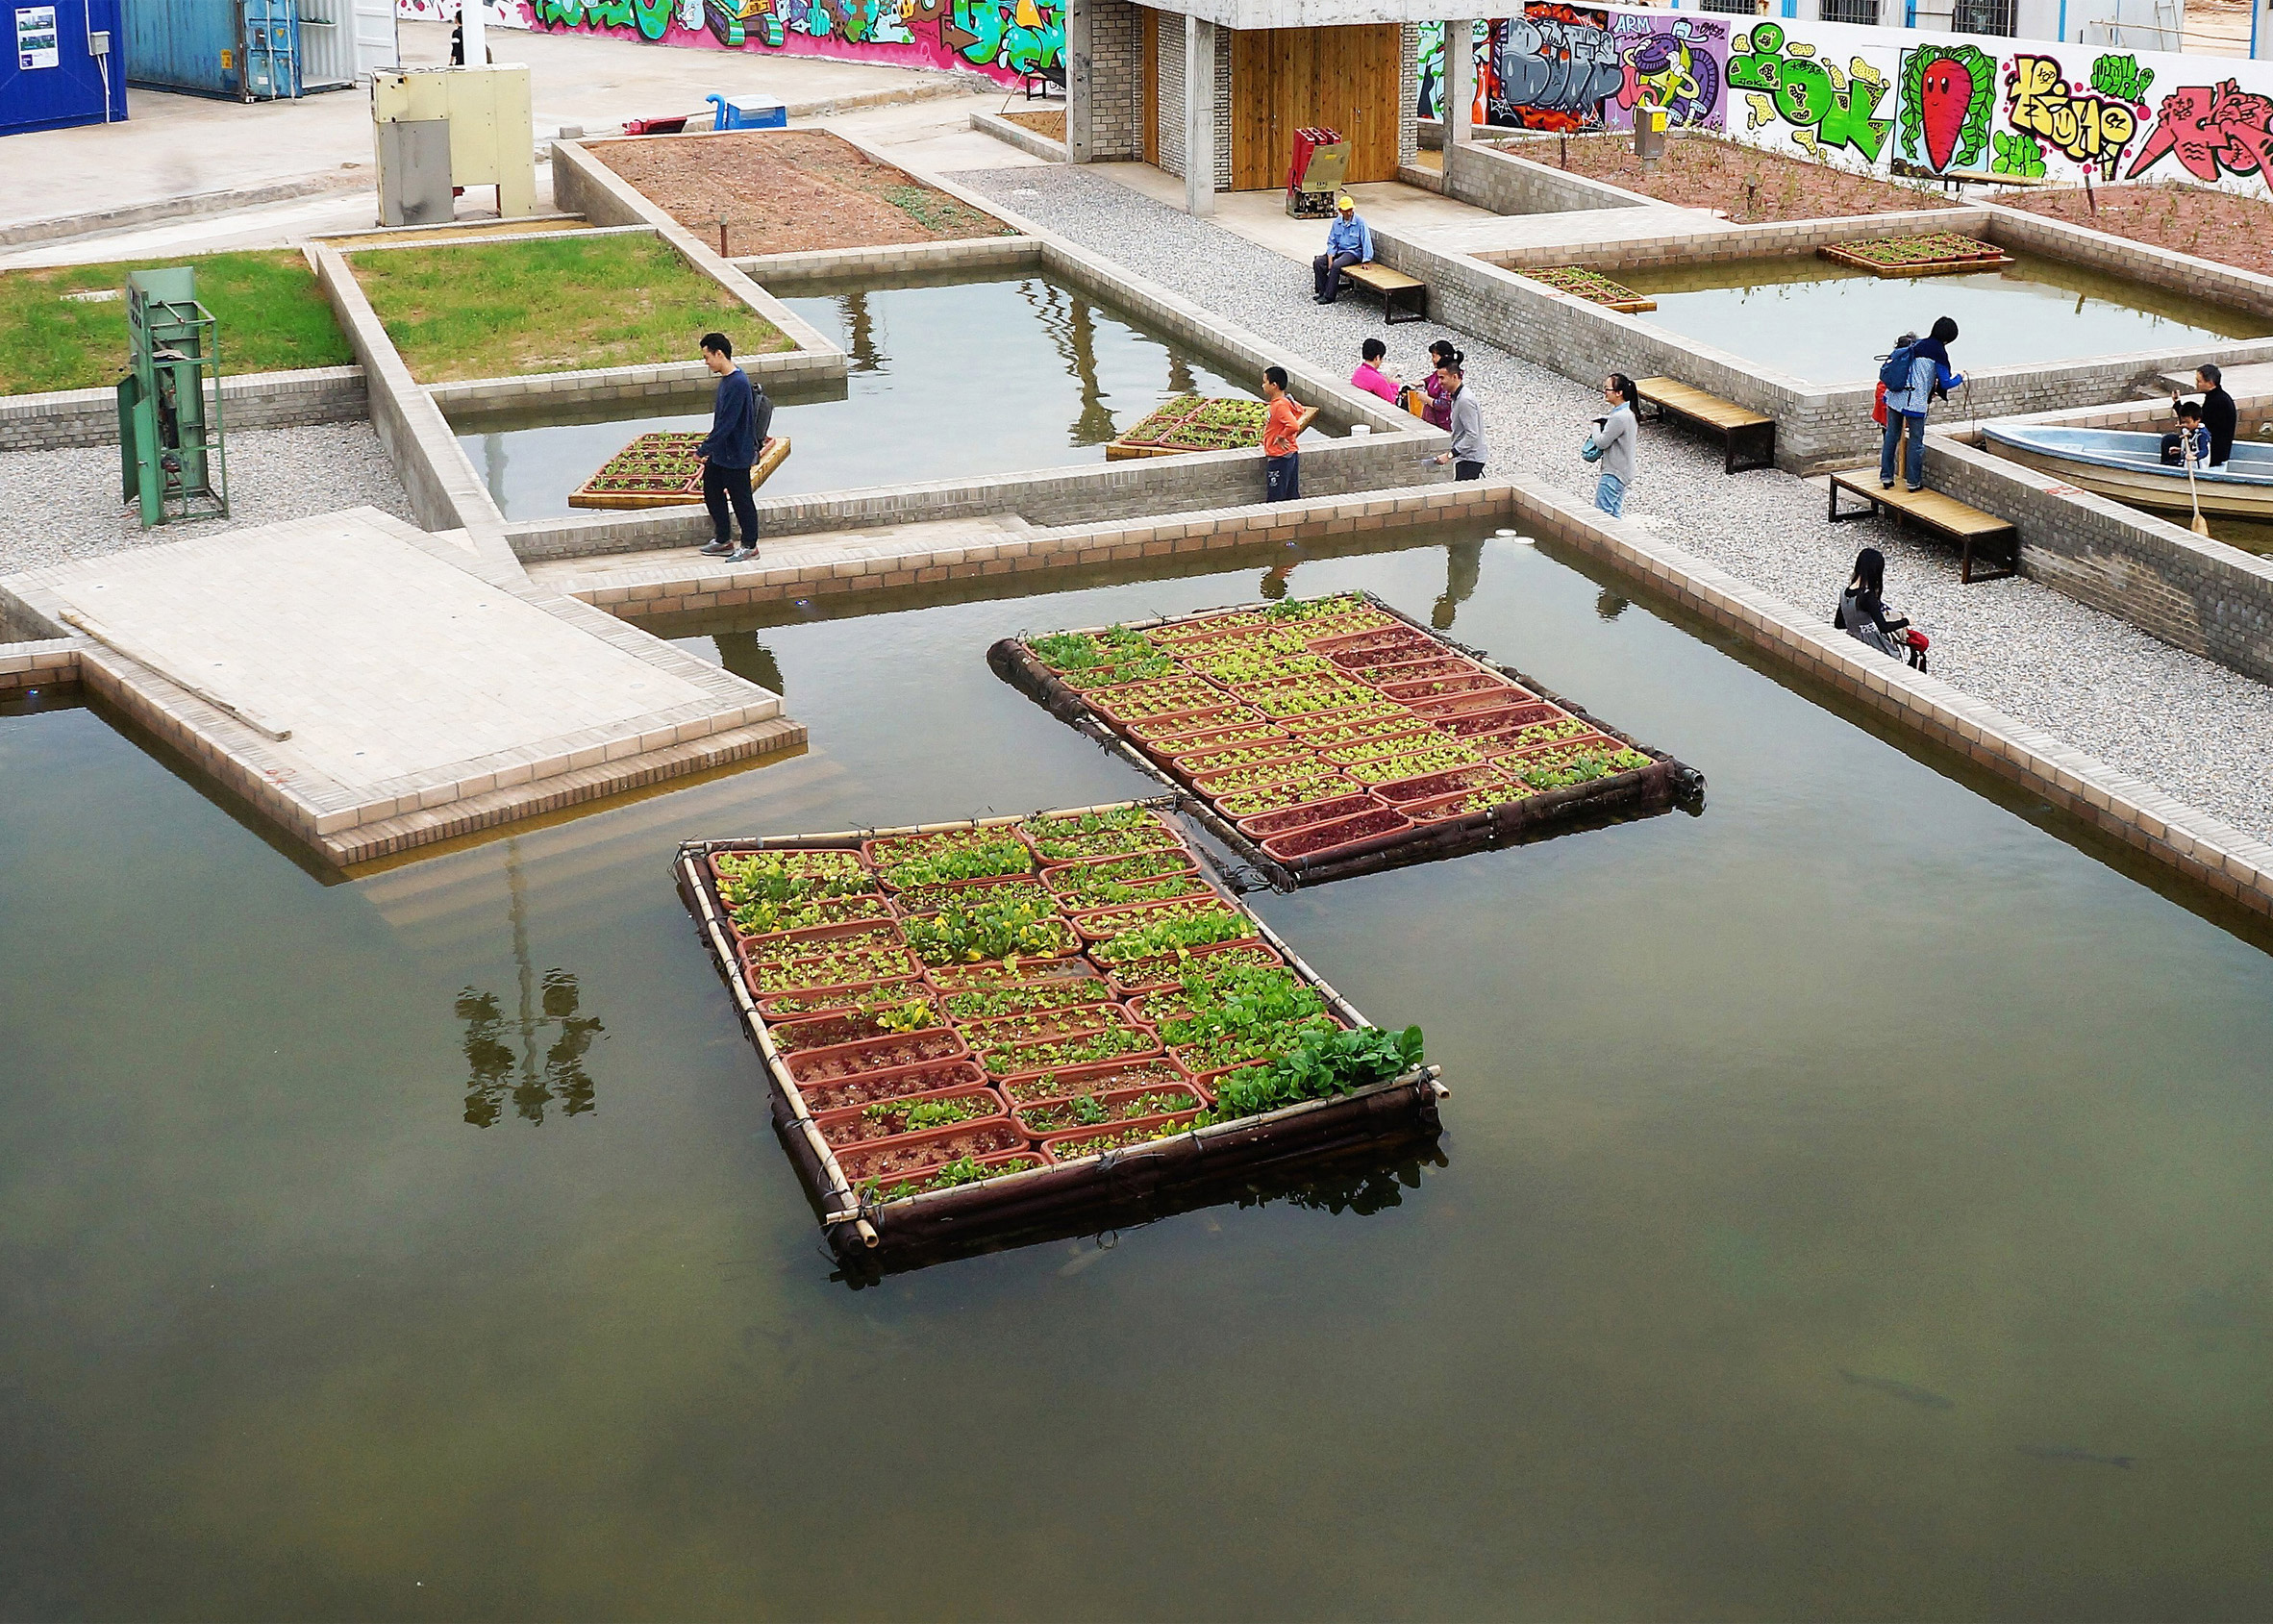 production-energy-and-recycling-floating-fields-thomas-chung_dezeen_2364_ss_1